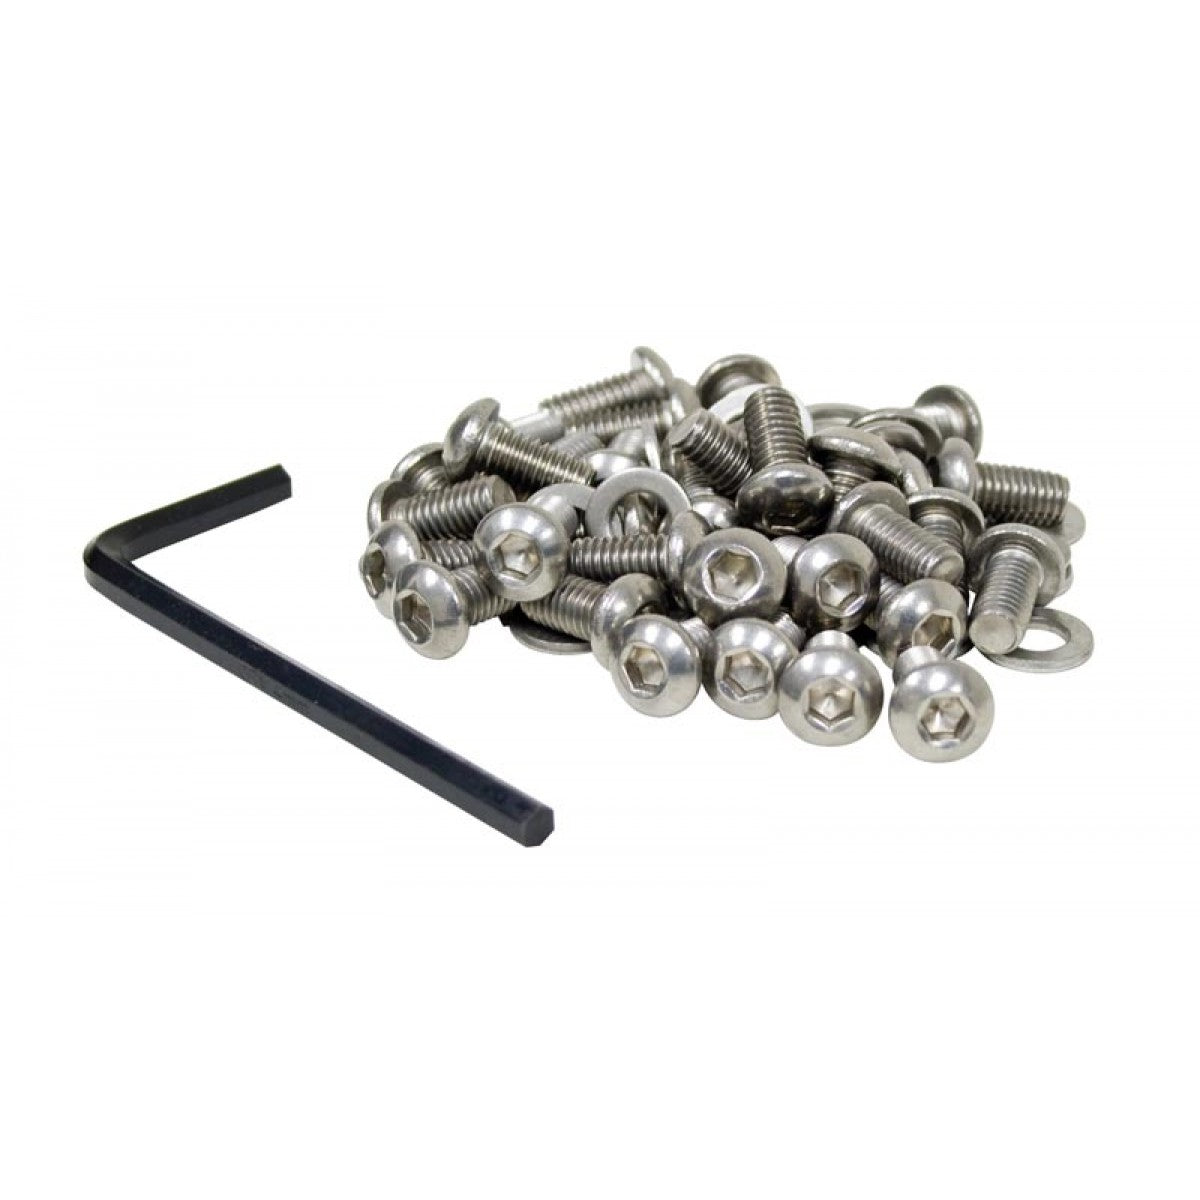 Shroud Screw Kit Stainless Steel for VW Cooling Tins